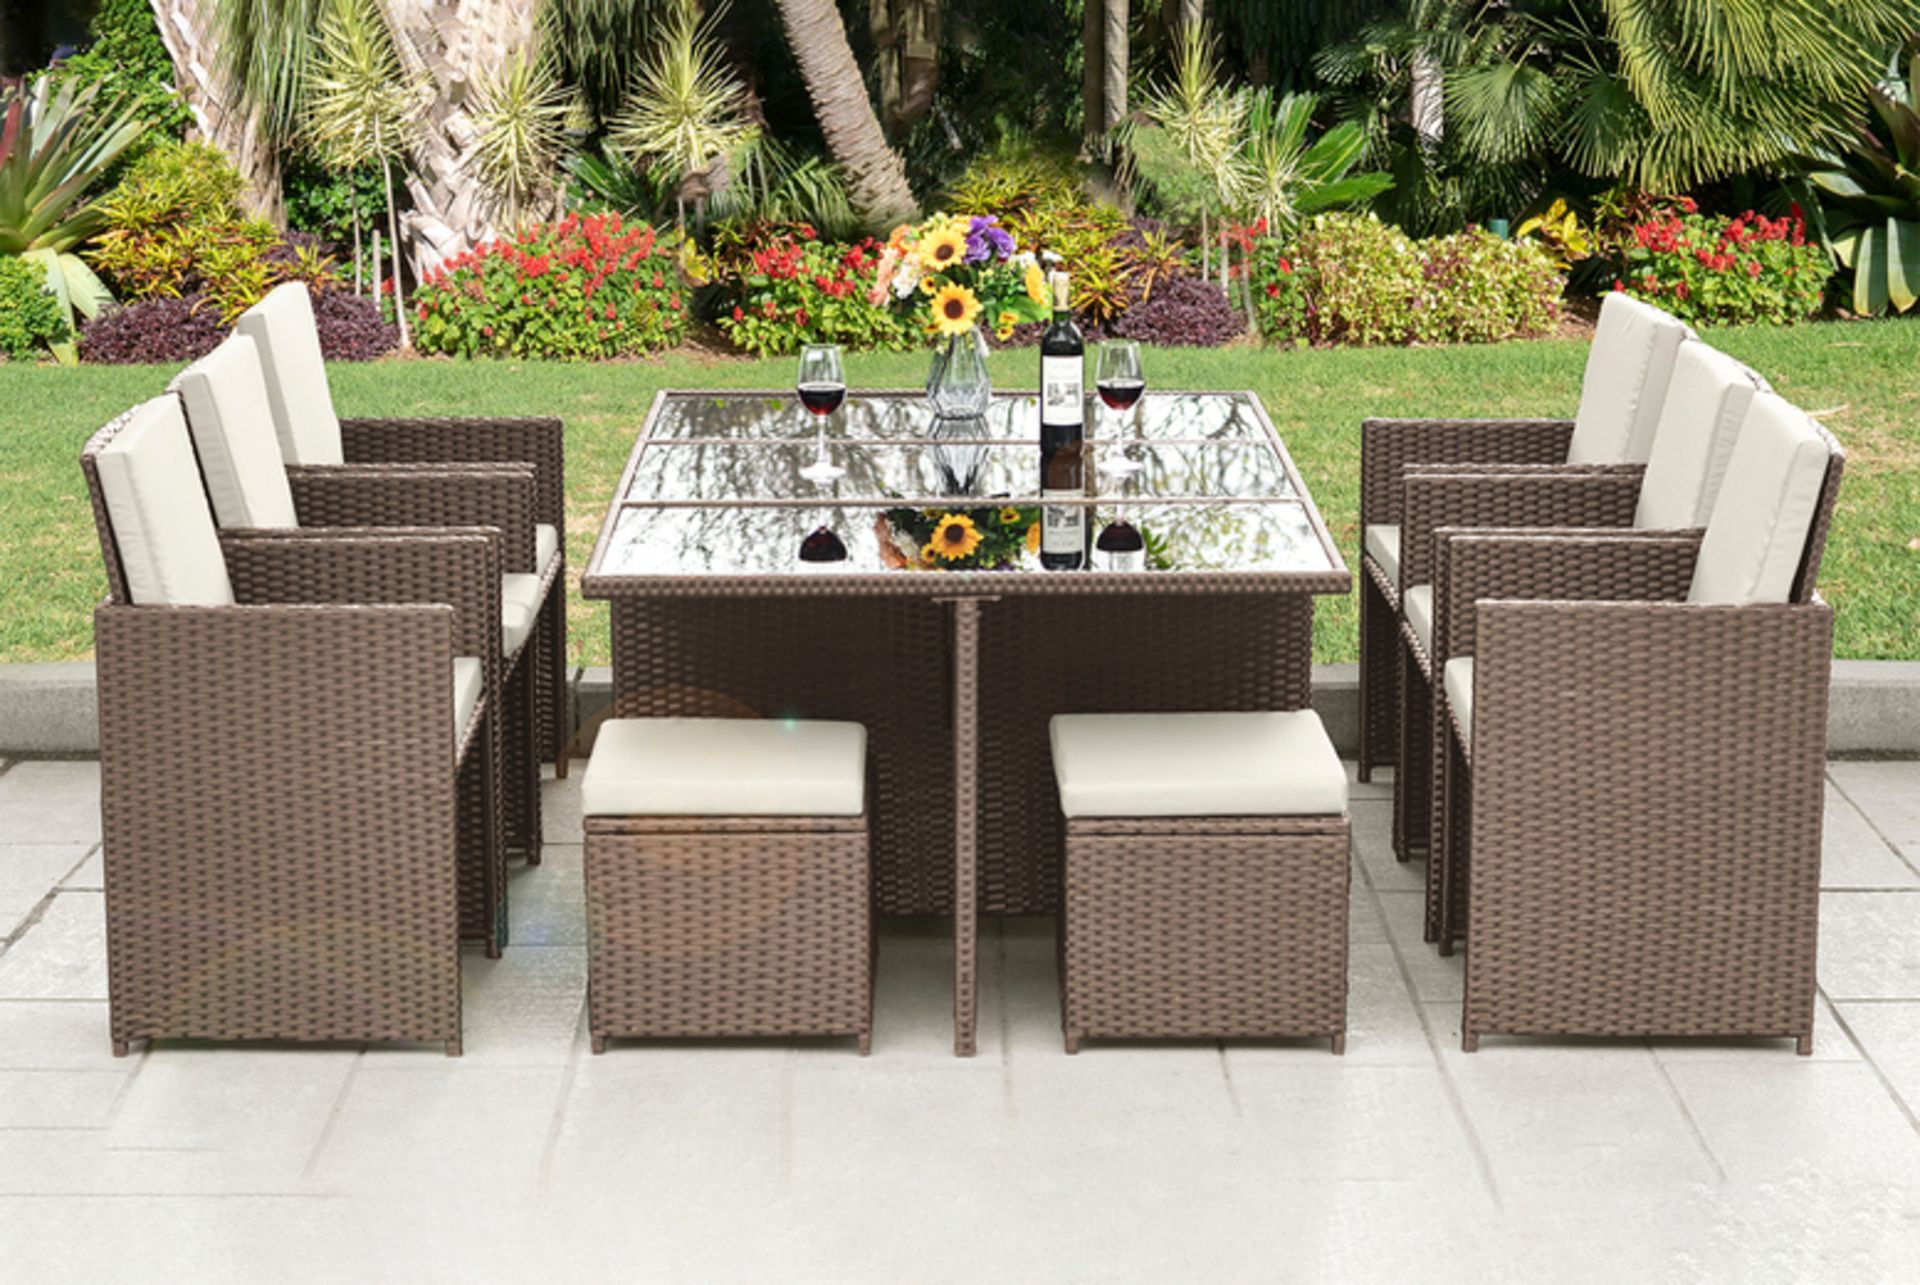 FREE DELIVERY - 10 SEATER RATTAN GARDEN DINING SET - BROWN